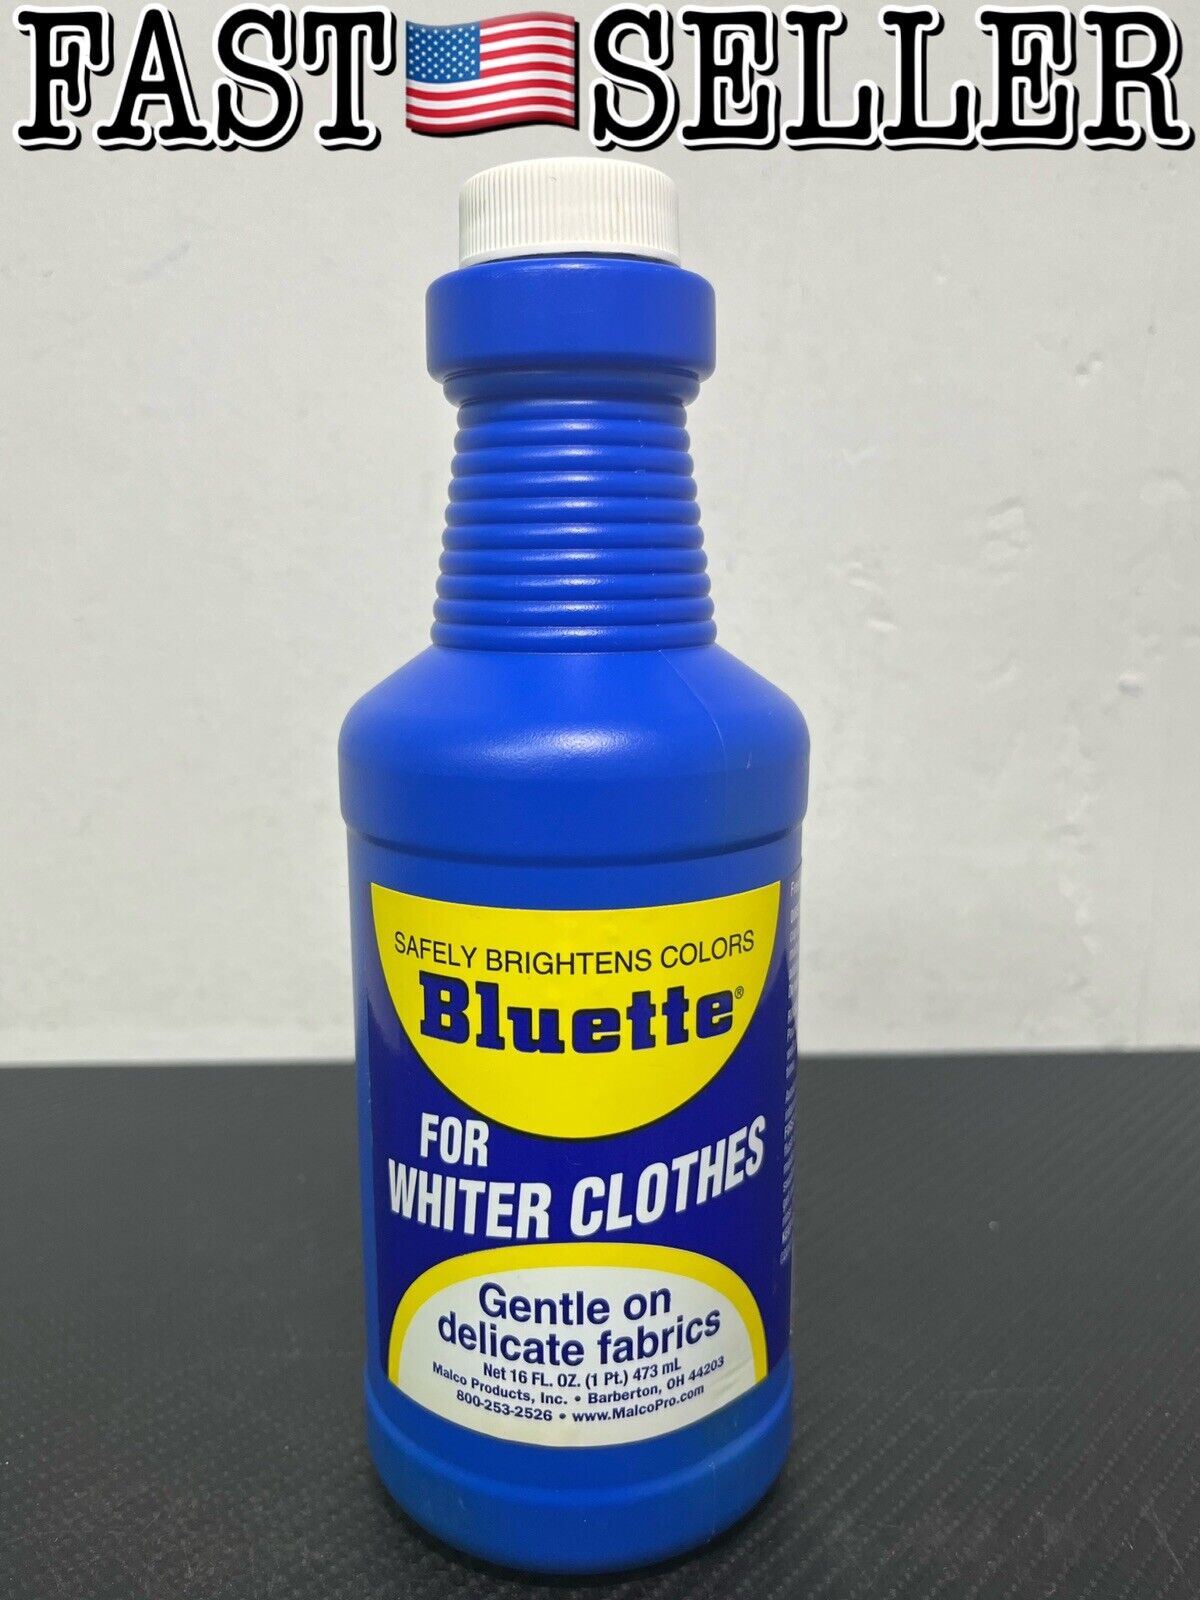 Bluette Concentrated Liquid Laundry Bluing For Whiter Clothes, 1